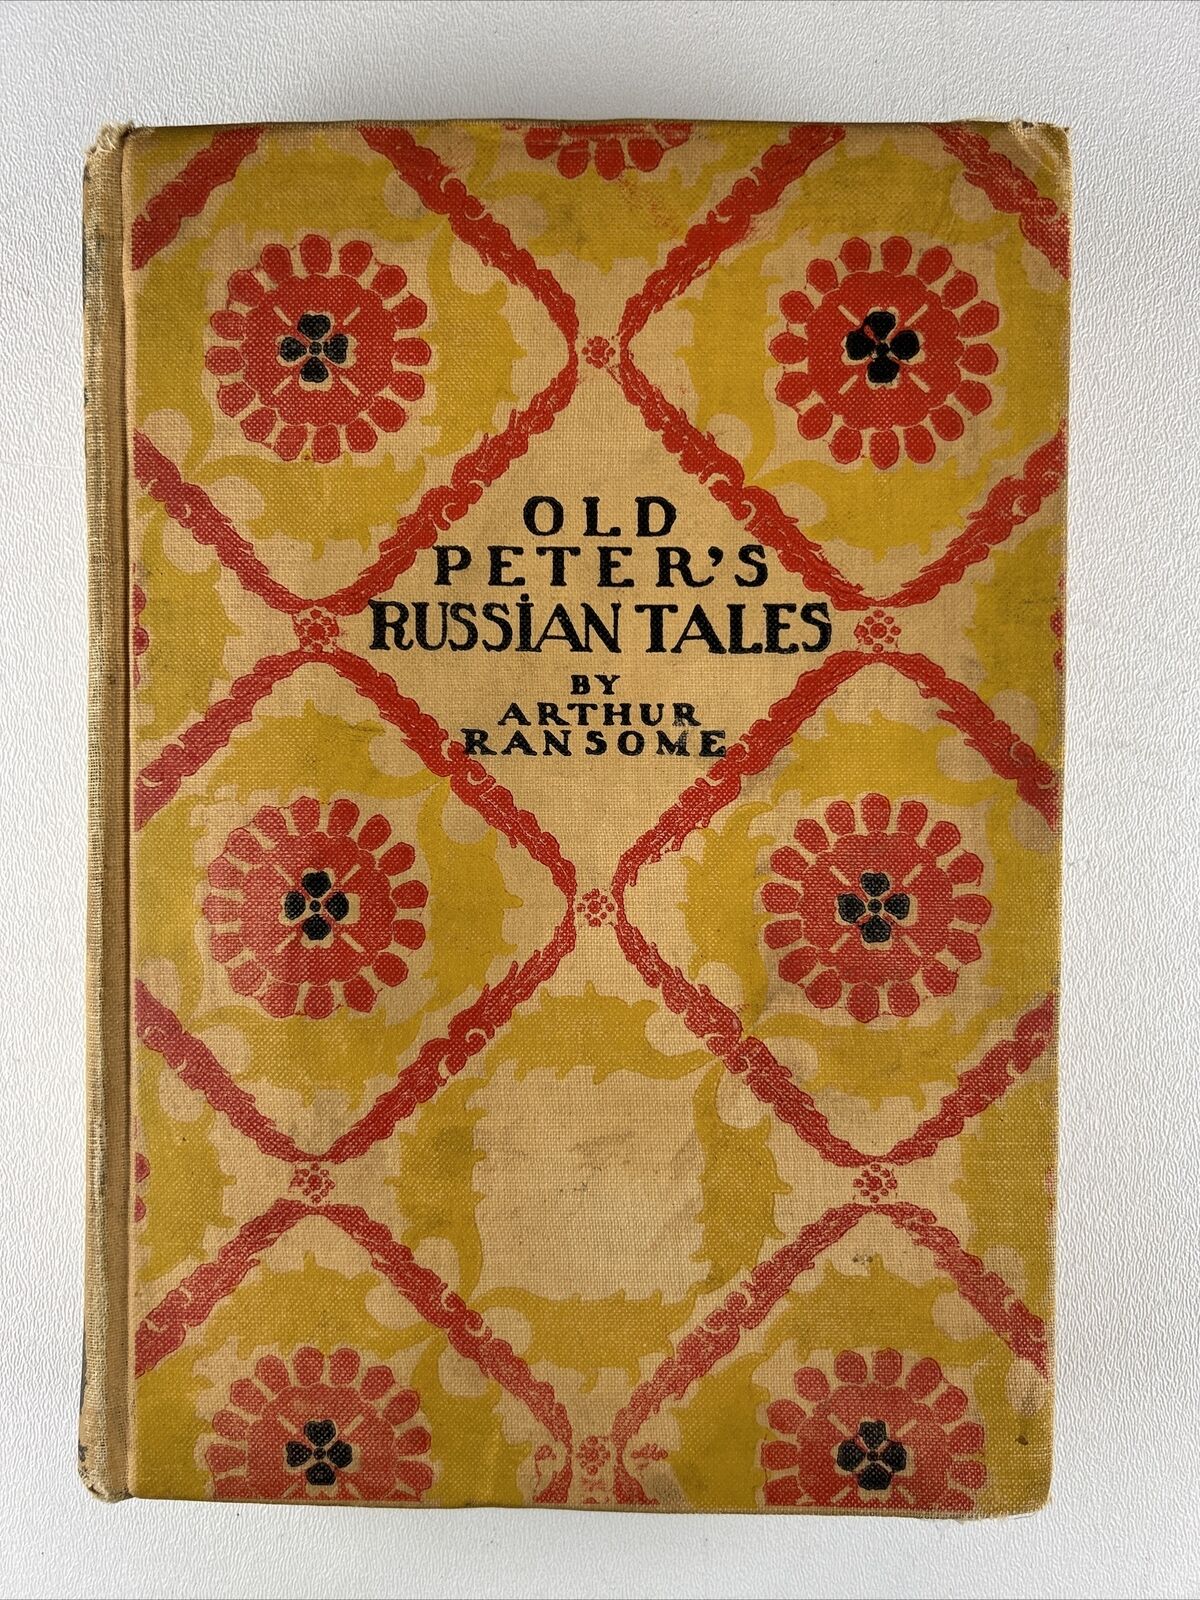 Old Peter\'s Russian Tales, Arthur Ransome, 1916, Illustrated, First Edition